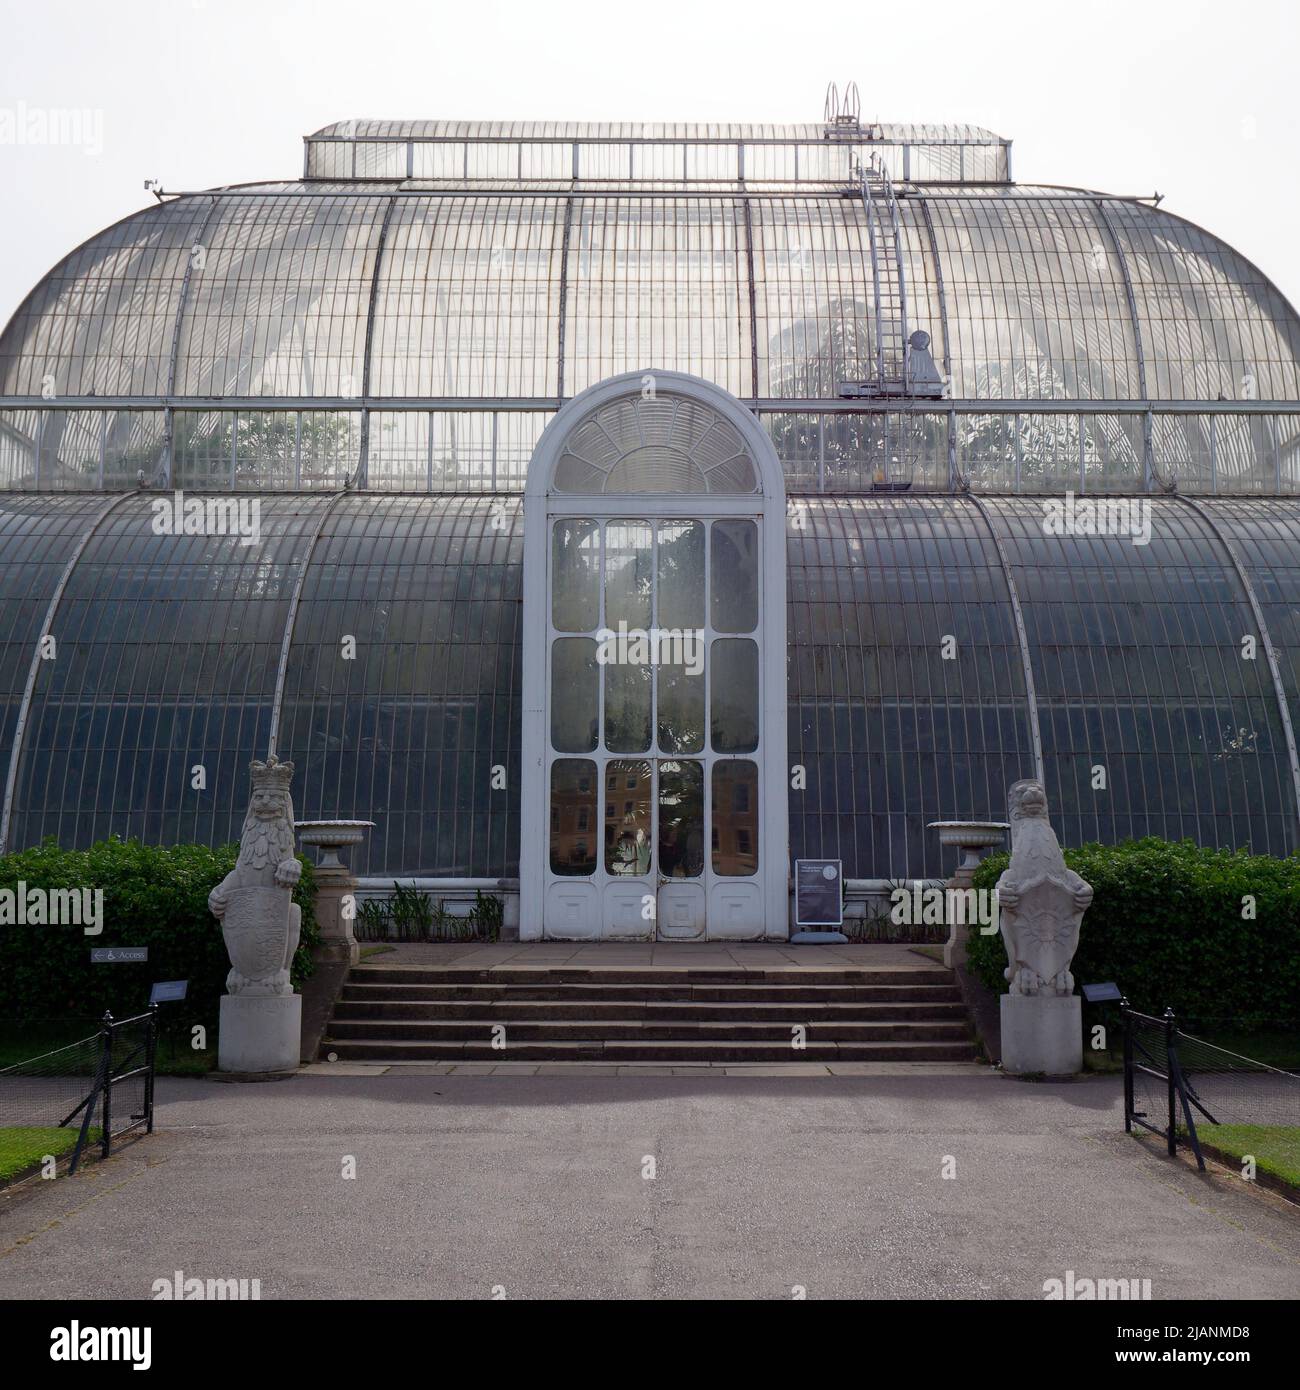 Richmond, Greater London, England, May 18 2022: Royal Botanic Gardens Kew. Entrance to the Palm House with steps and two statues. Stock Photo